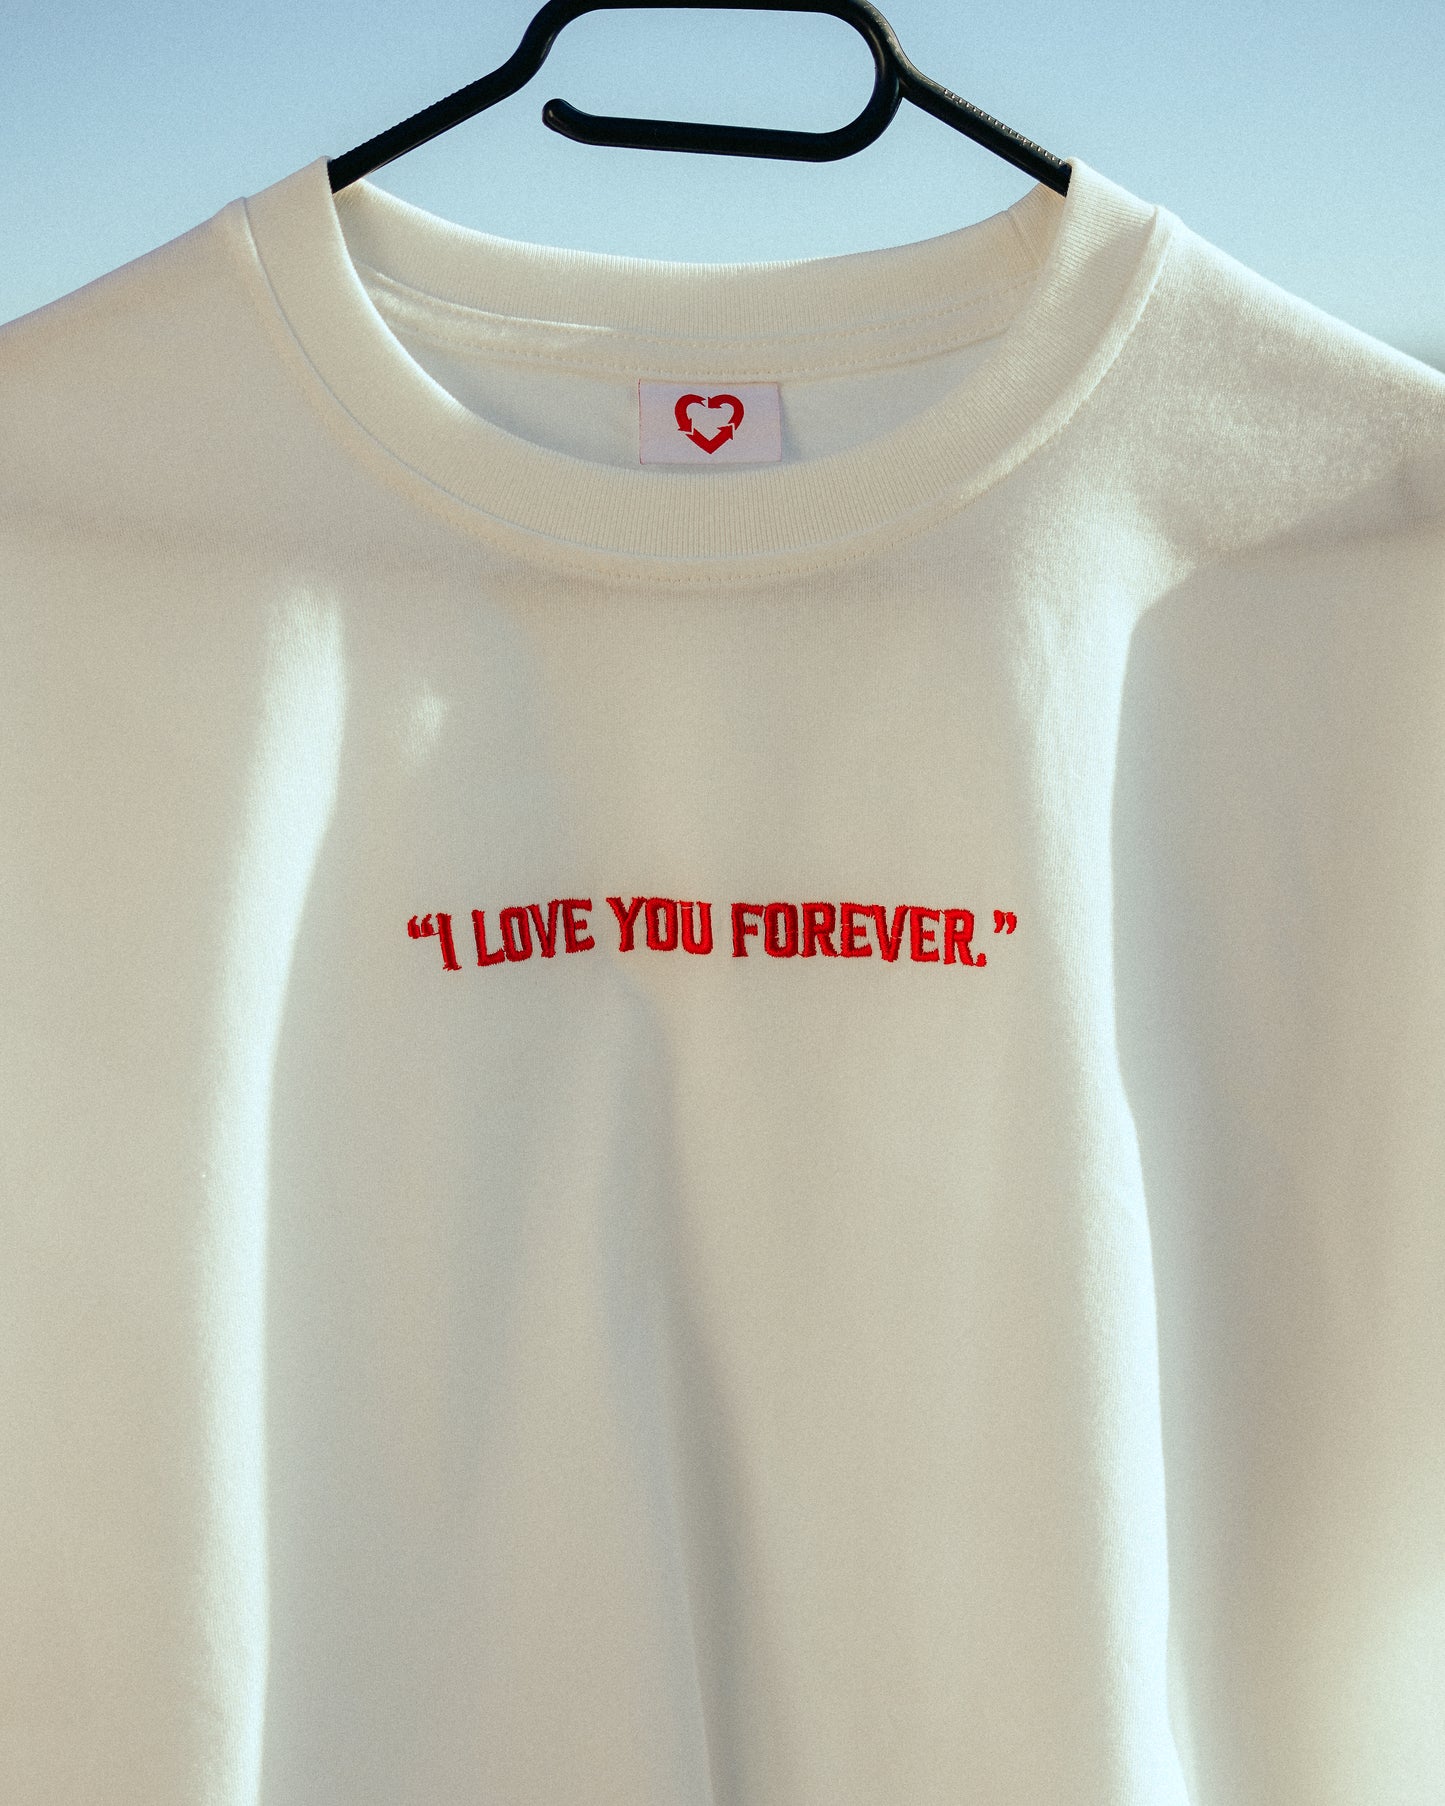 "I LOVE YOU FOREVER." CROP TOP